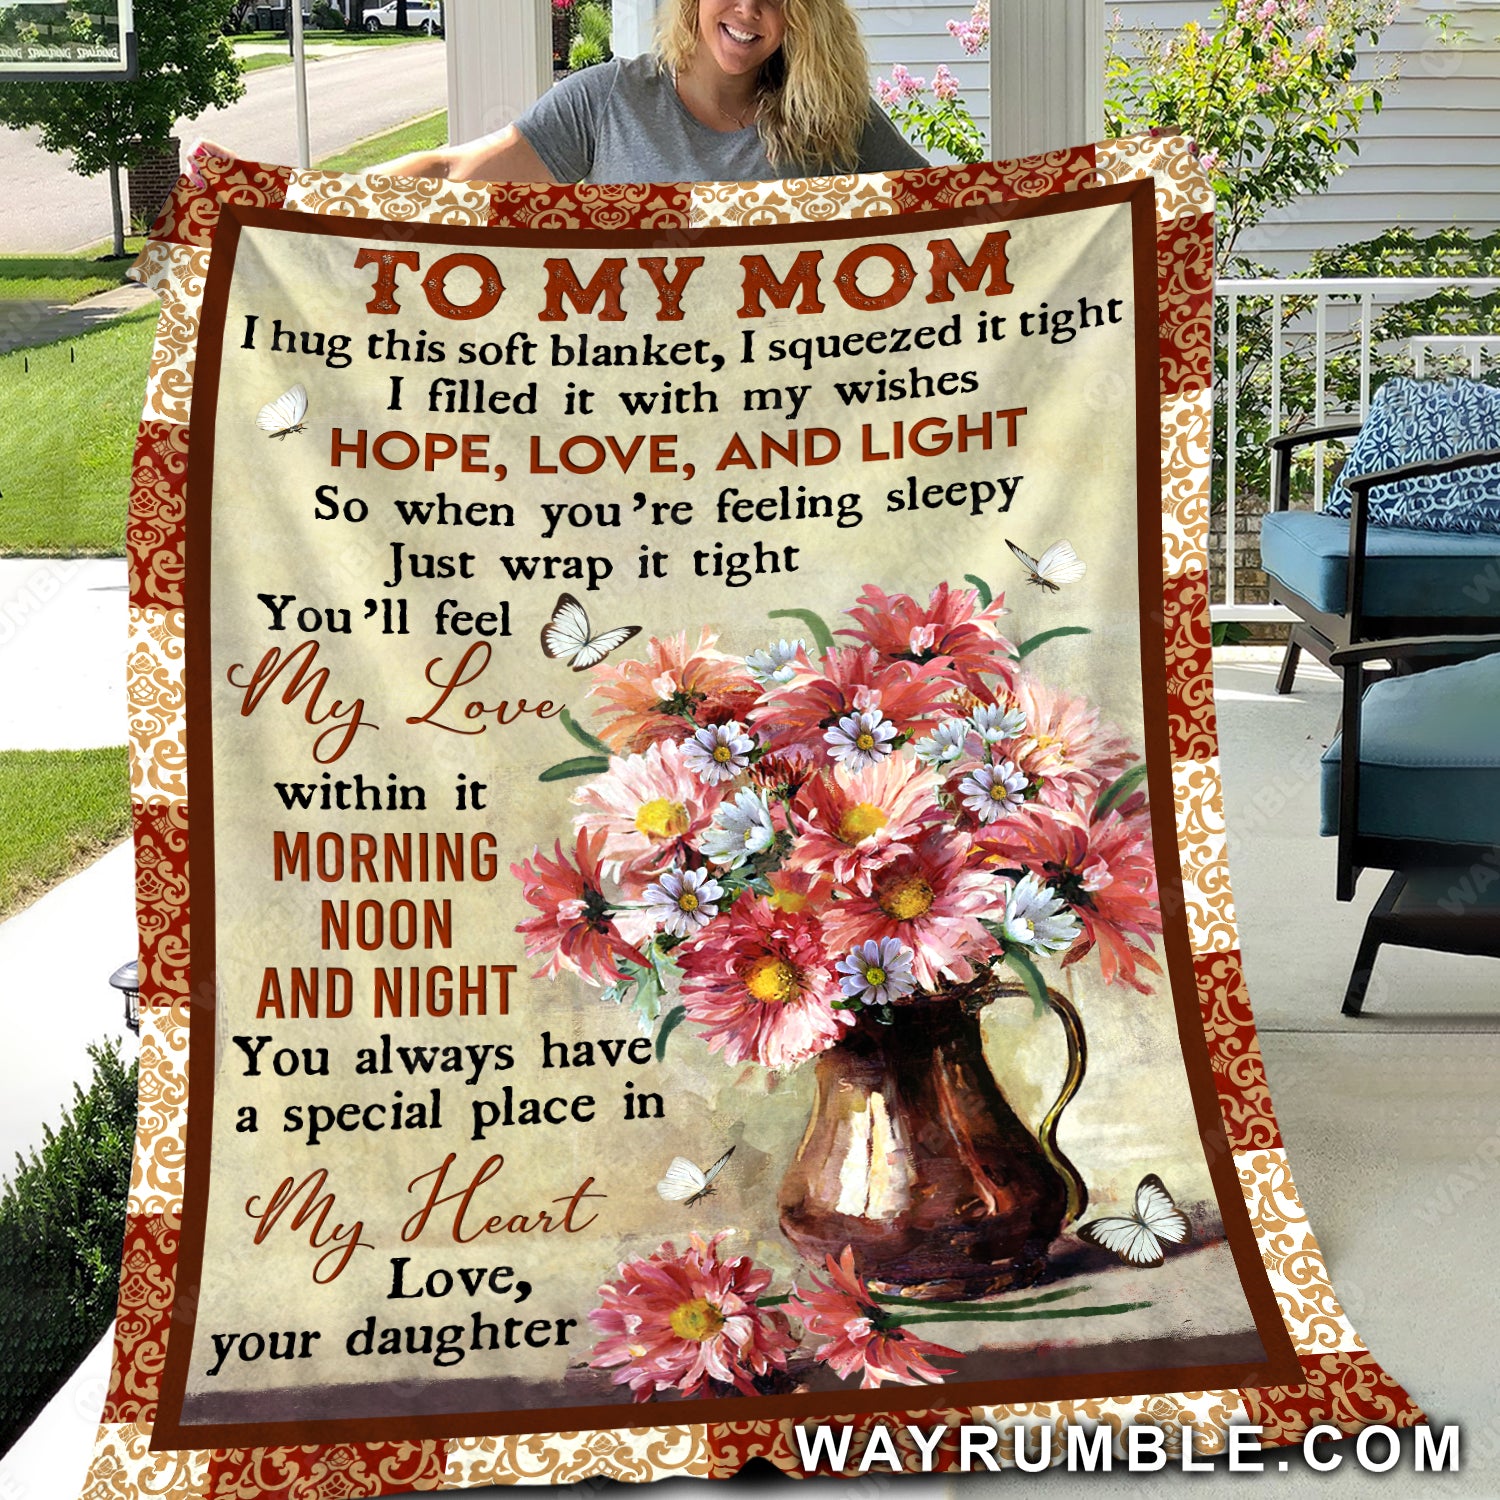 Daughter to mom, Flower vase, White butterfly, Colorful daisy, You always have a special place in my heart - Family Blanket